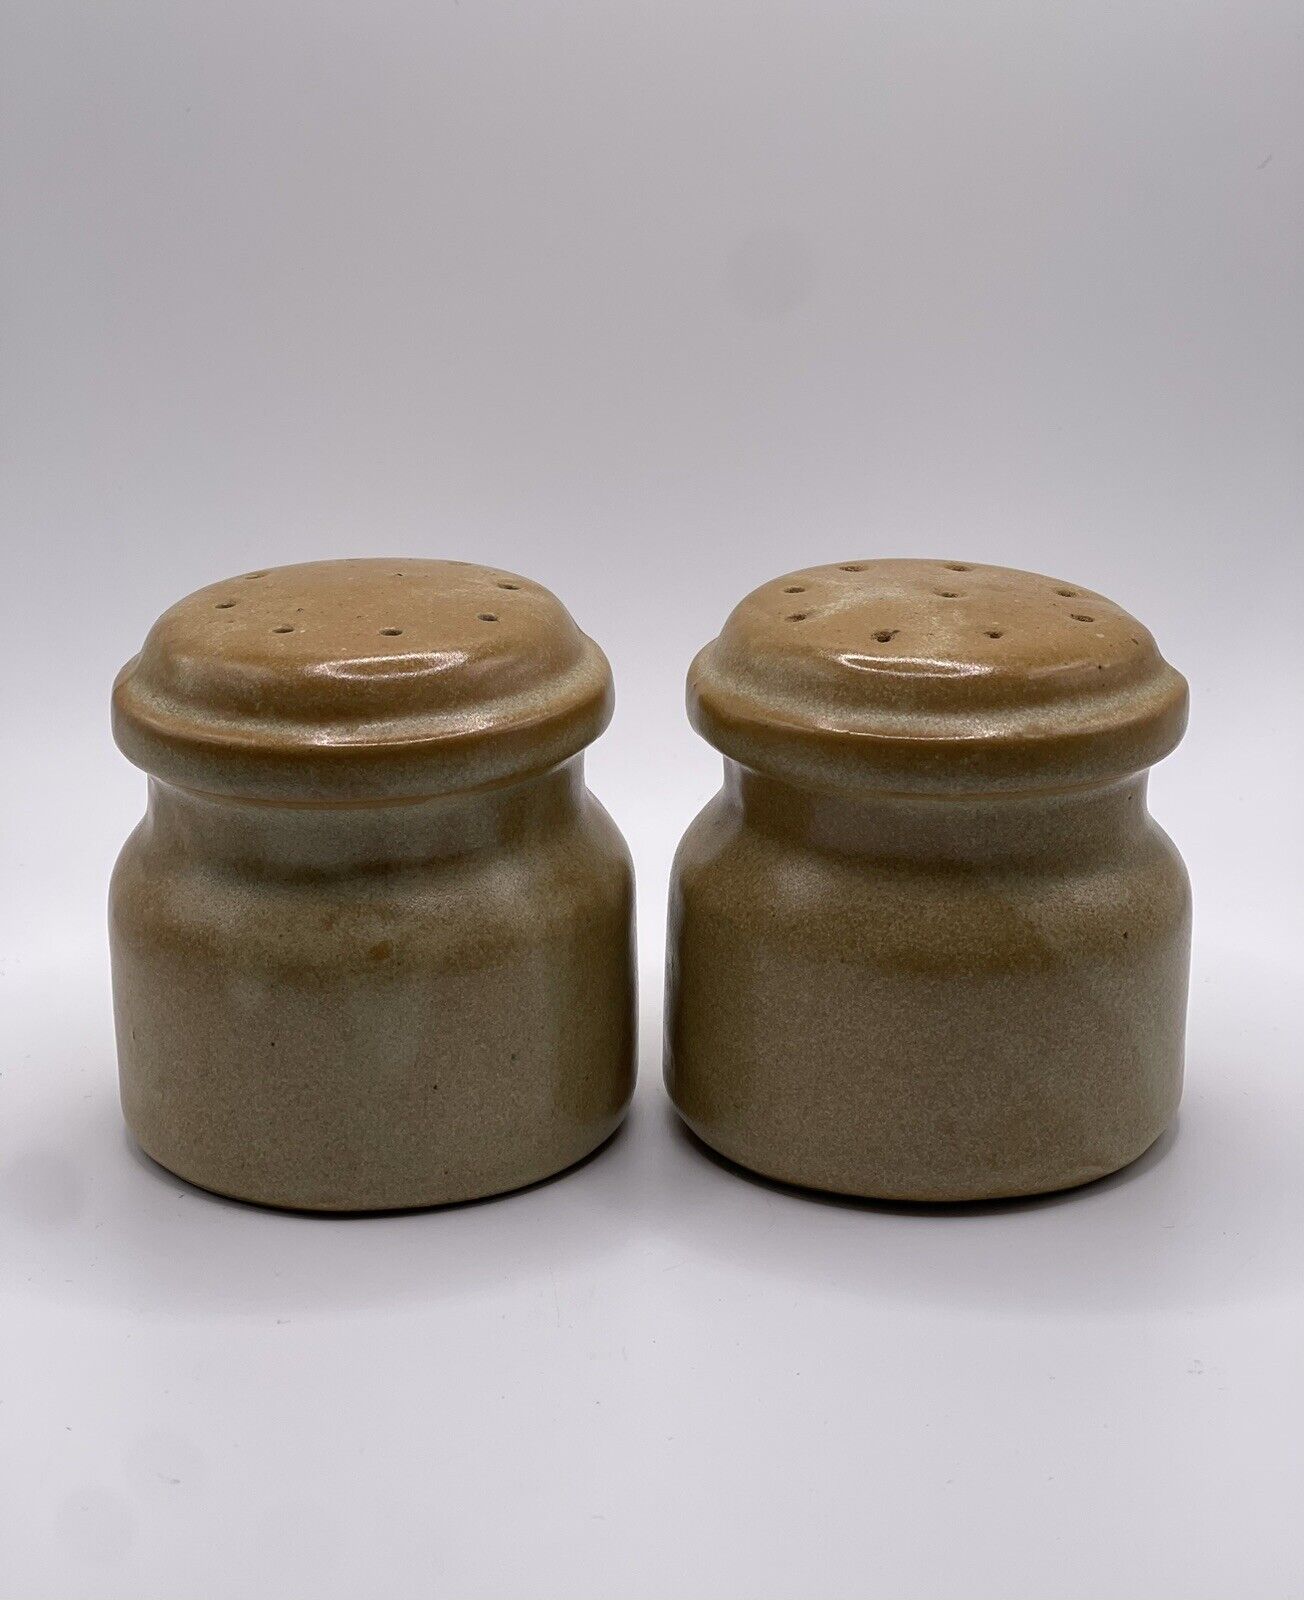 Nice Pottery Mushroom Form Salt And Pepper Shakers Cork Stoppers